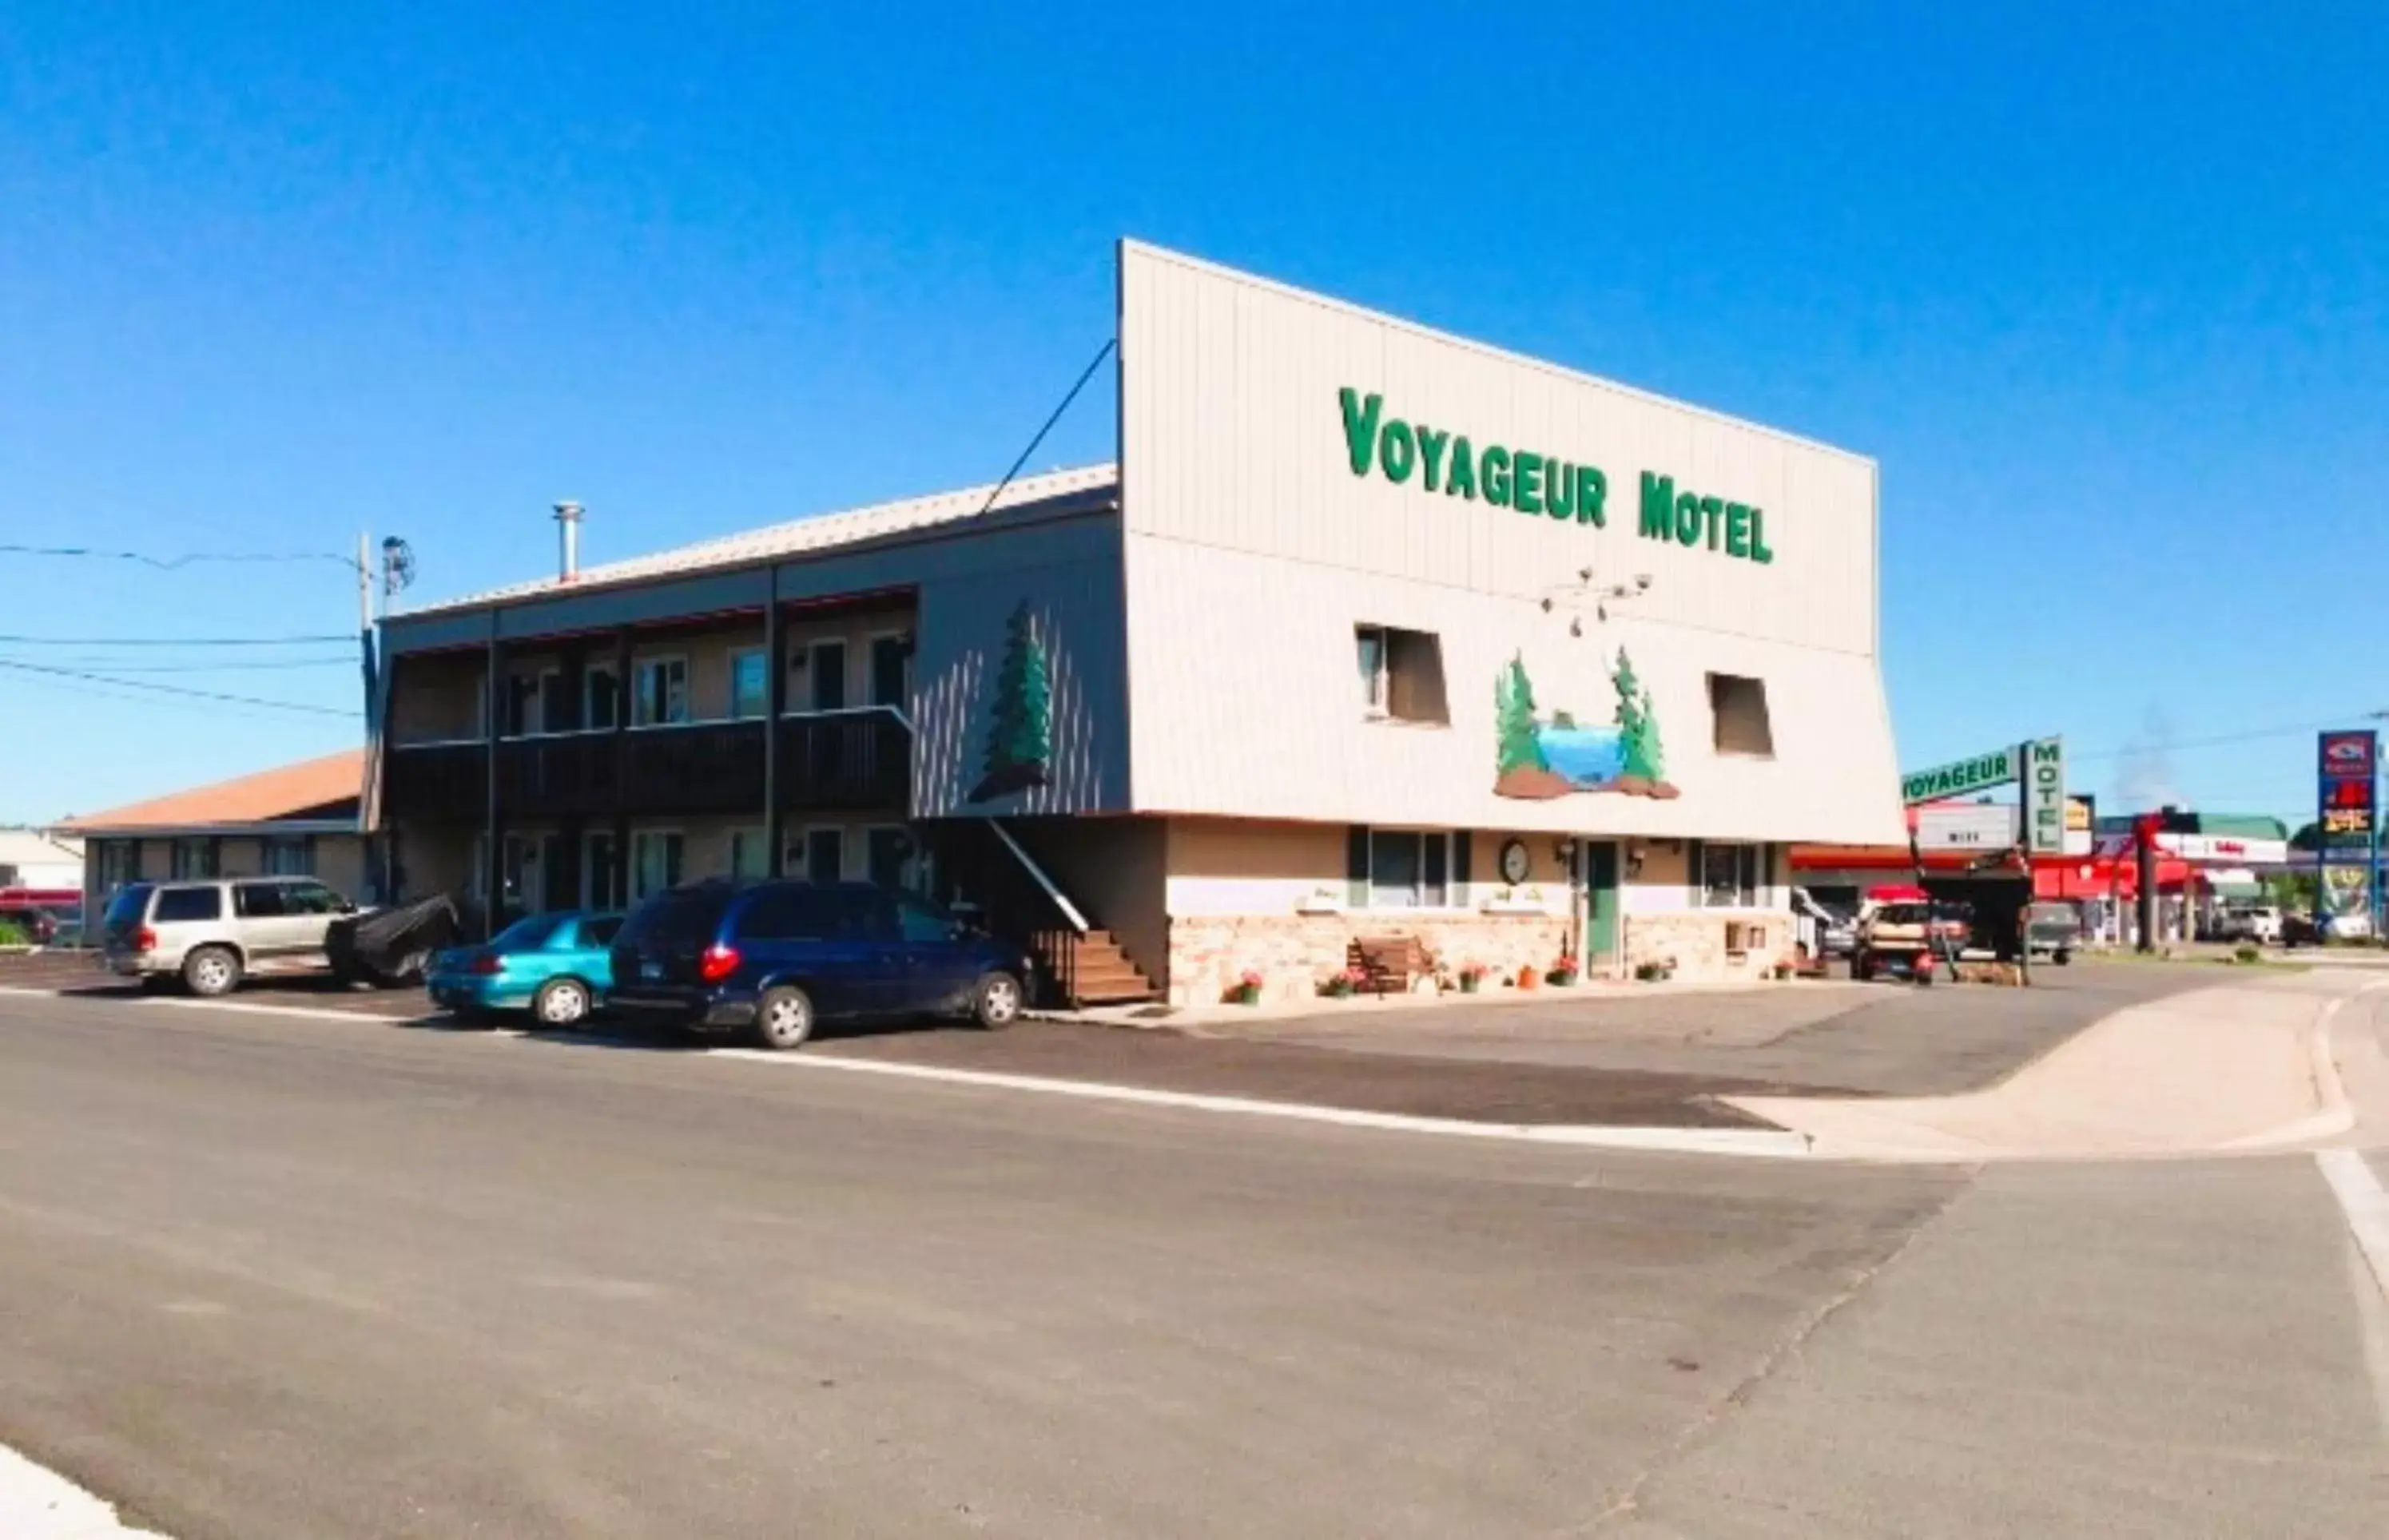 Parking, Property Building in Love Hotels Voyageur by OYO at International Falls MN